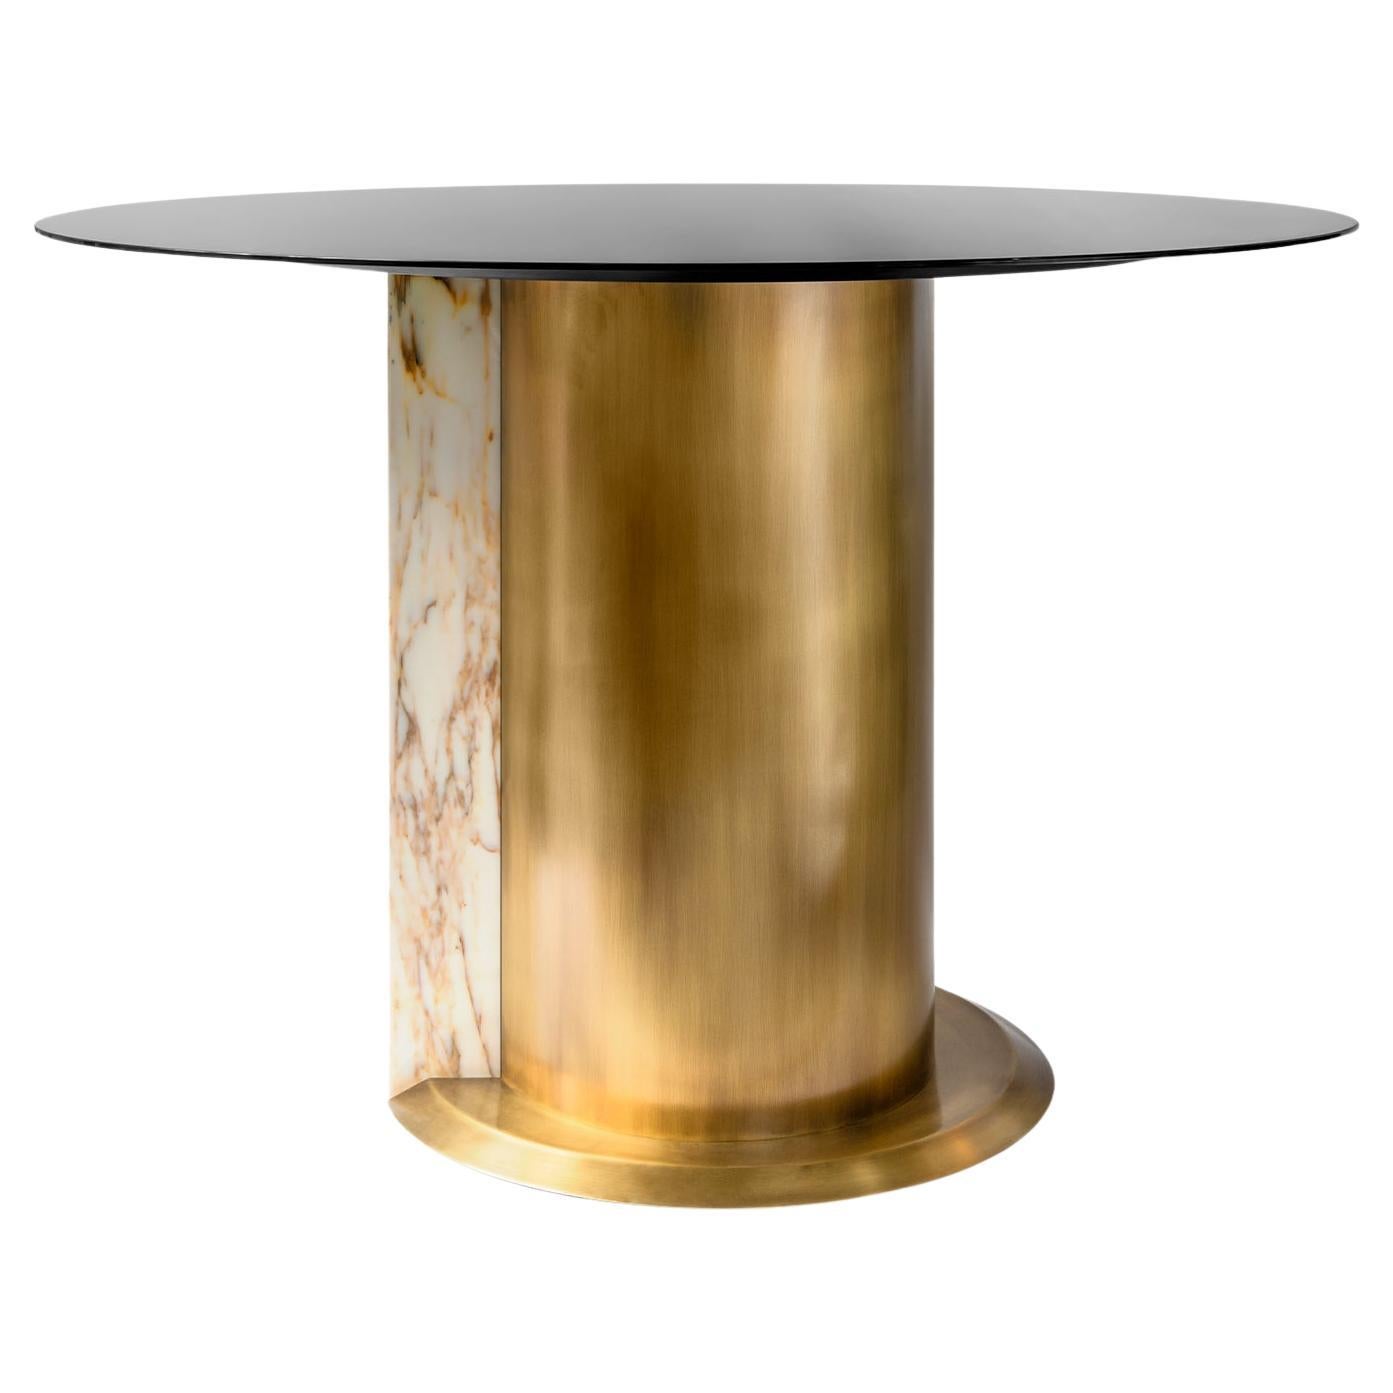 Tim Circular Brass Plated Metal & Marble Dining Table For Sale